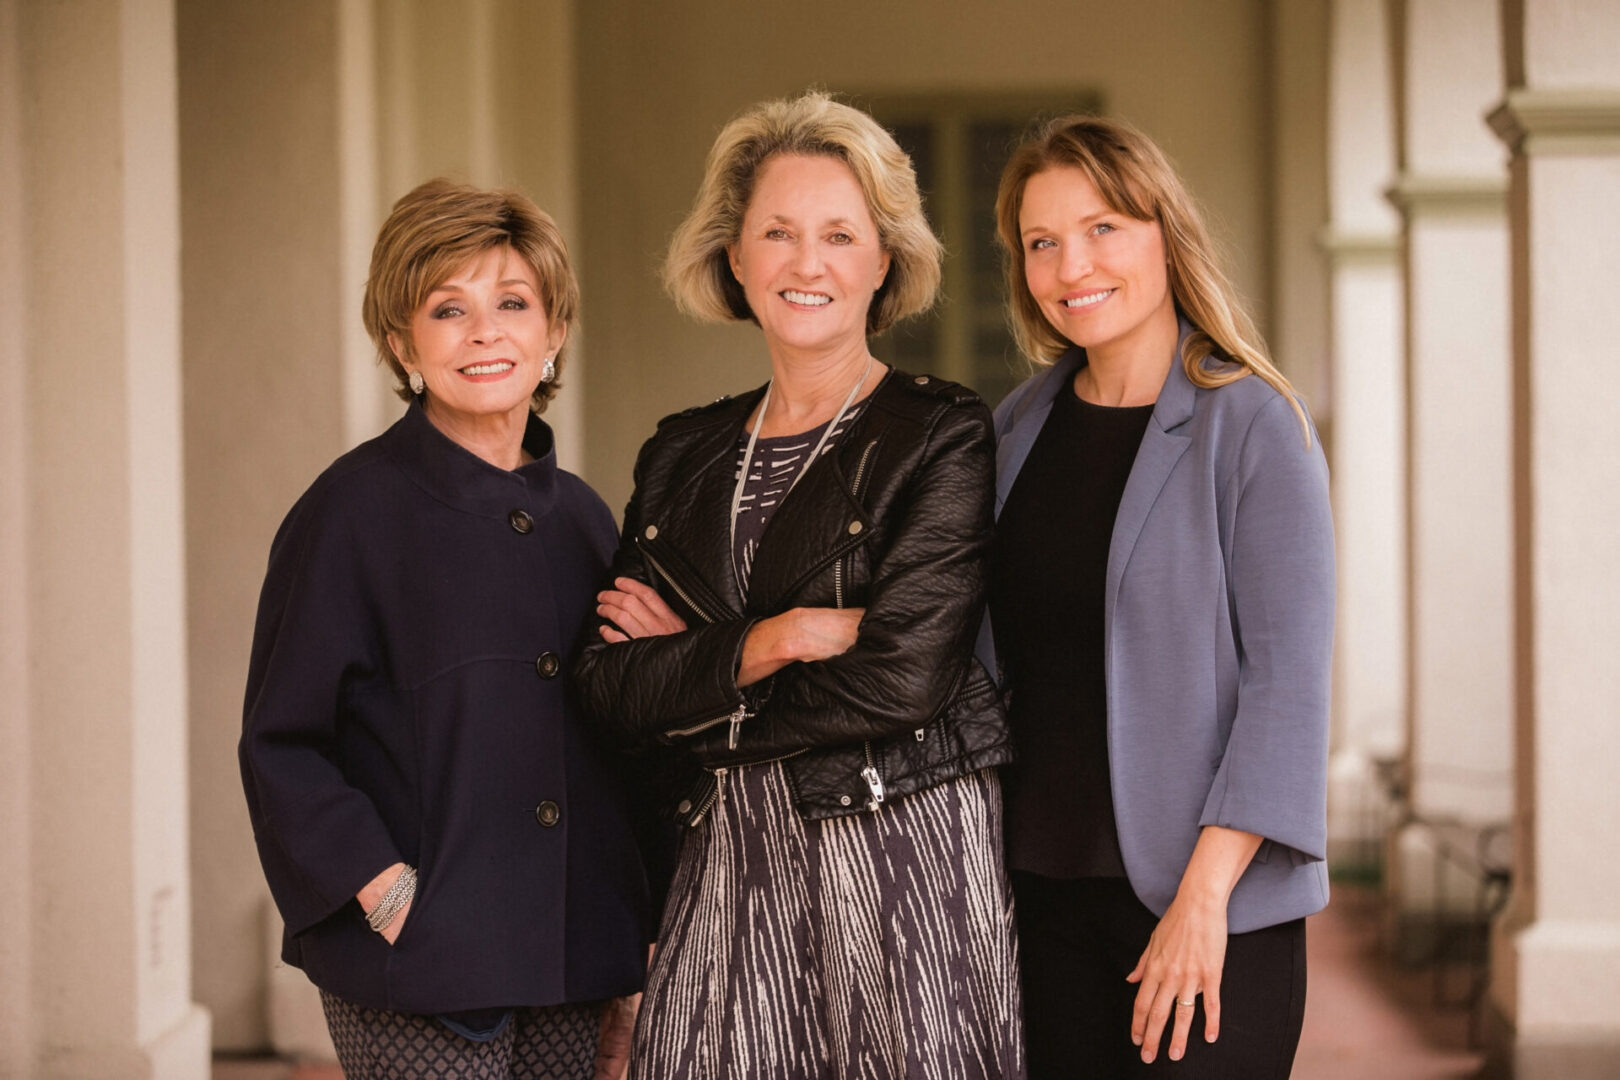 Meet The Hardest Working Women In Bay Area Real Estate - Carla, Geri, and Simone